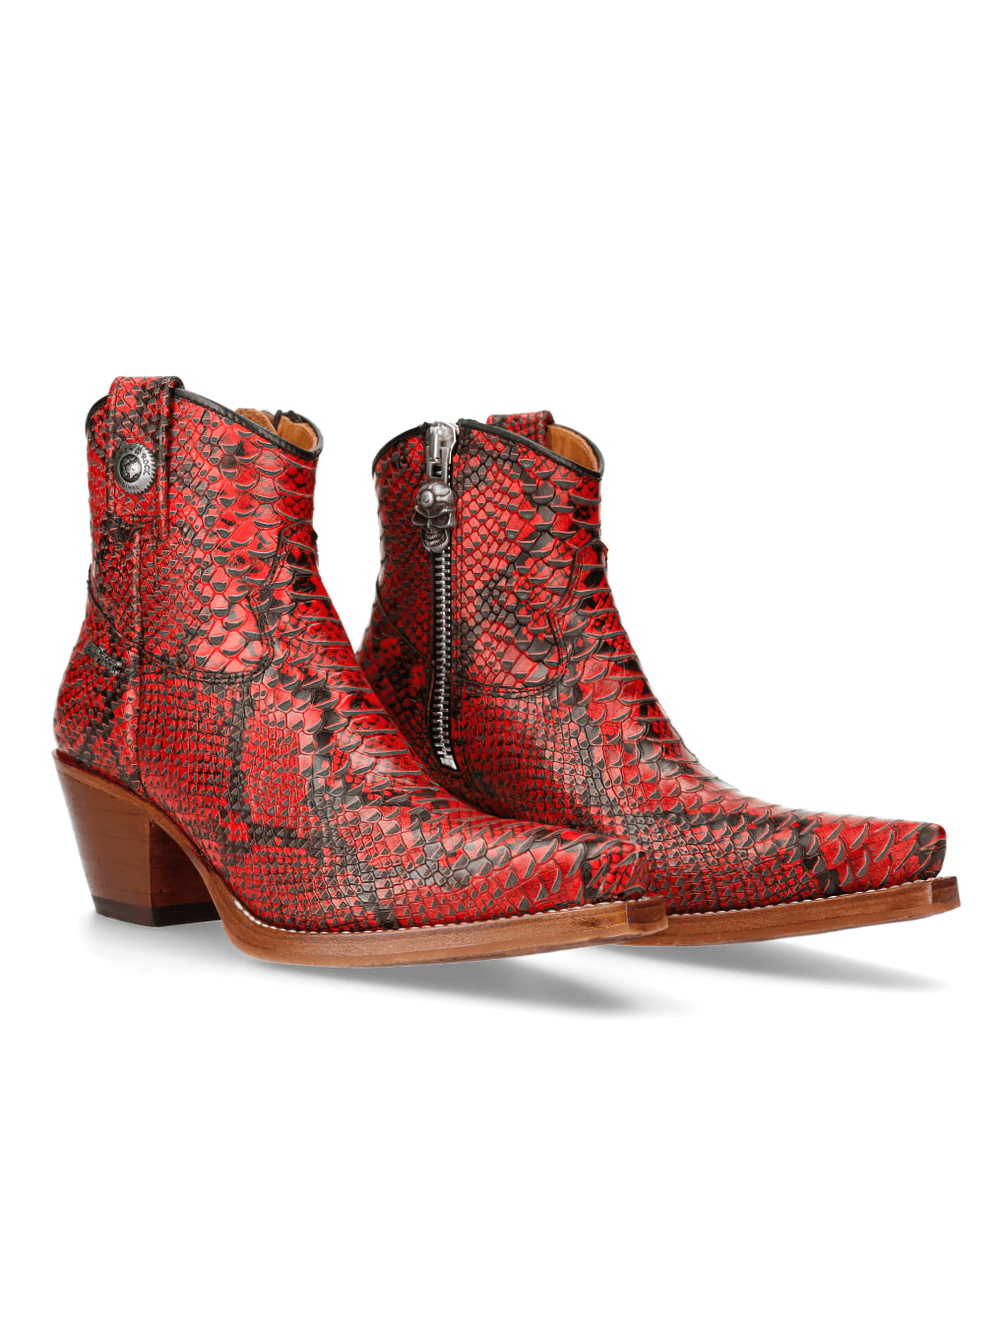 NEW ROCK Red Snake Print Ankle Boots with Zipper Detail